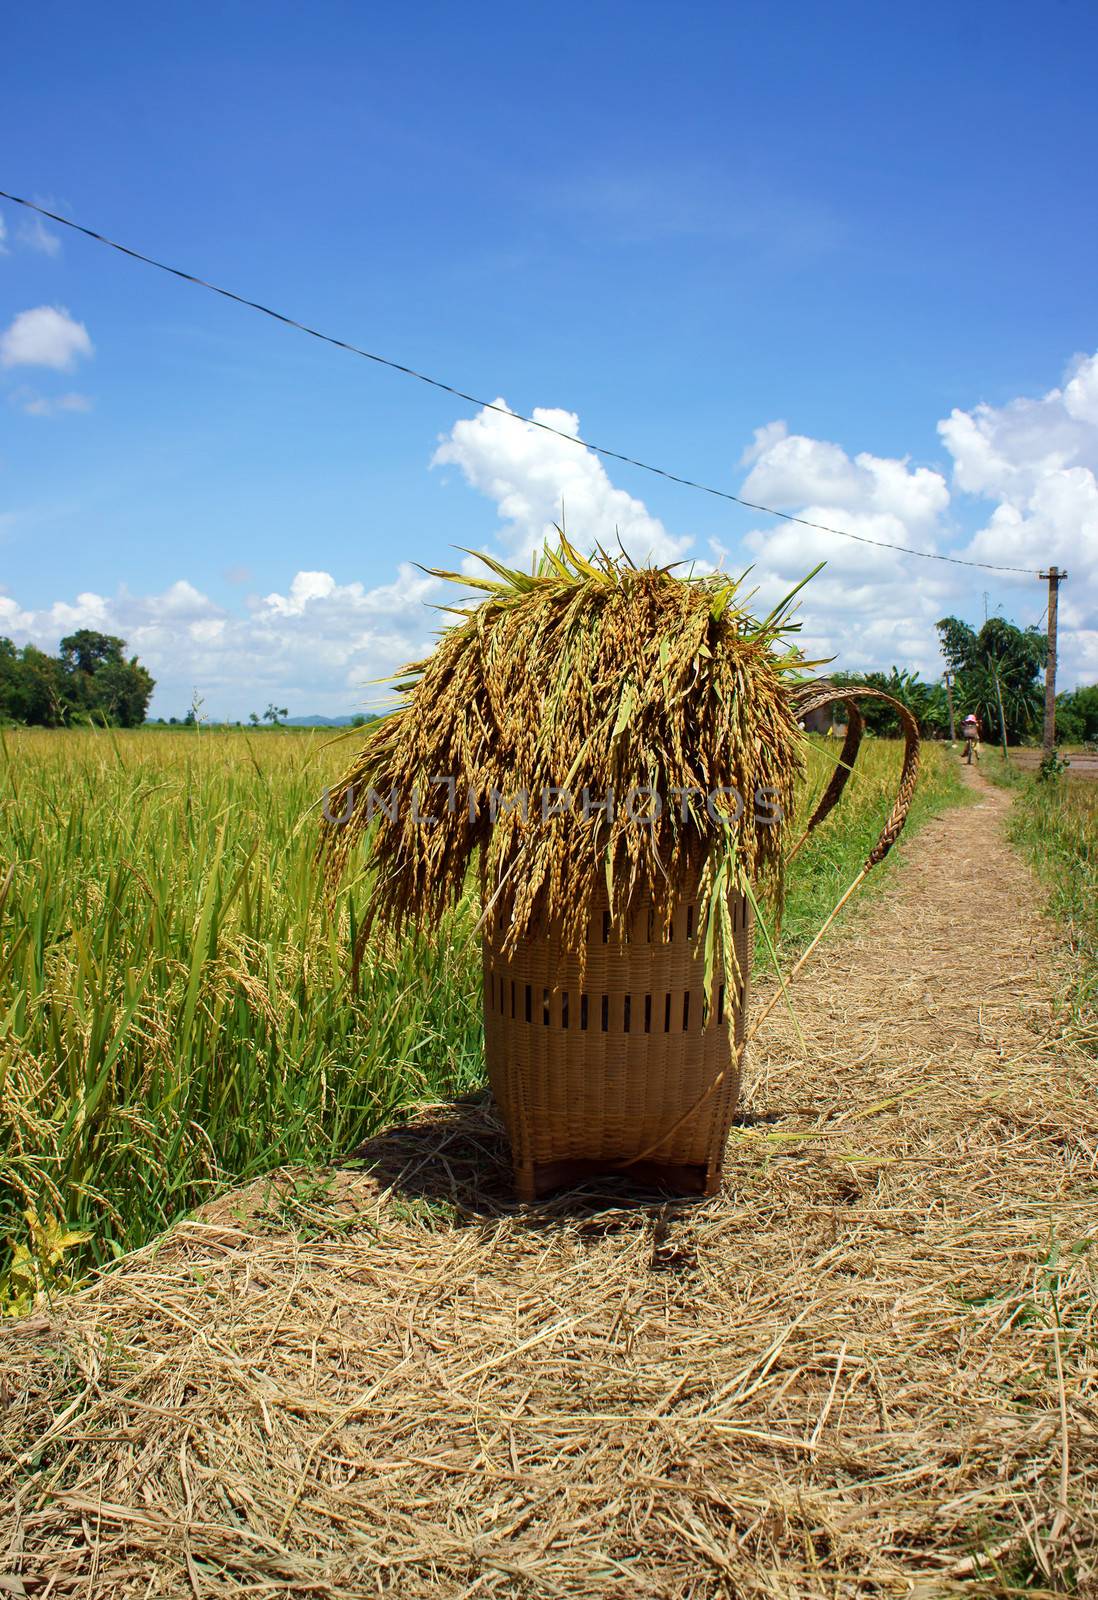 Sheat of corn put in papoose, and let on the way among ricefield